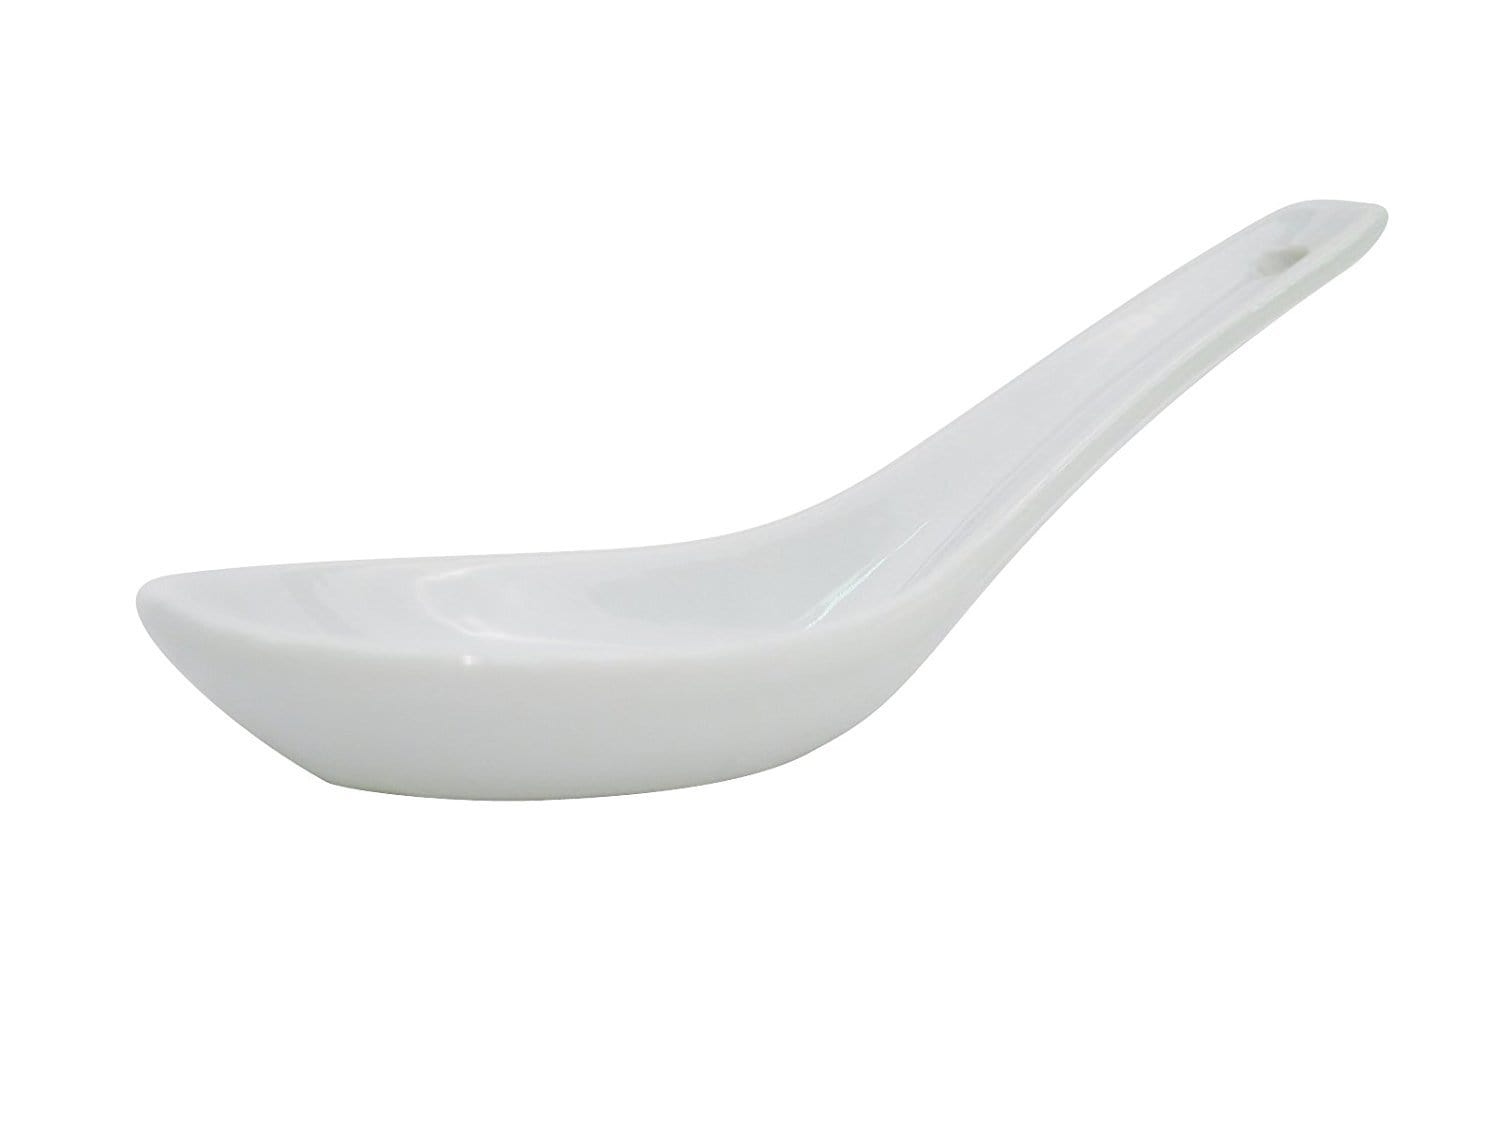 CAC Serving Utensils CAC 5.5" Kent Chinese Soup Spoon